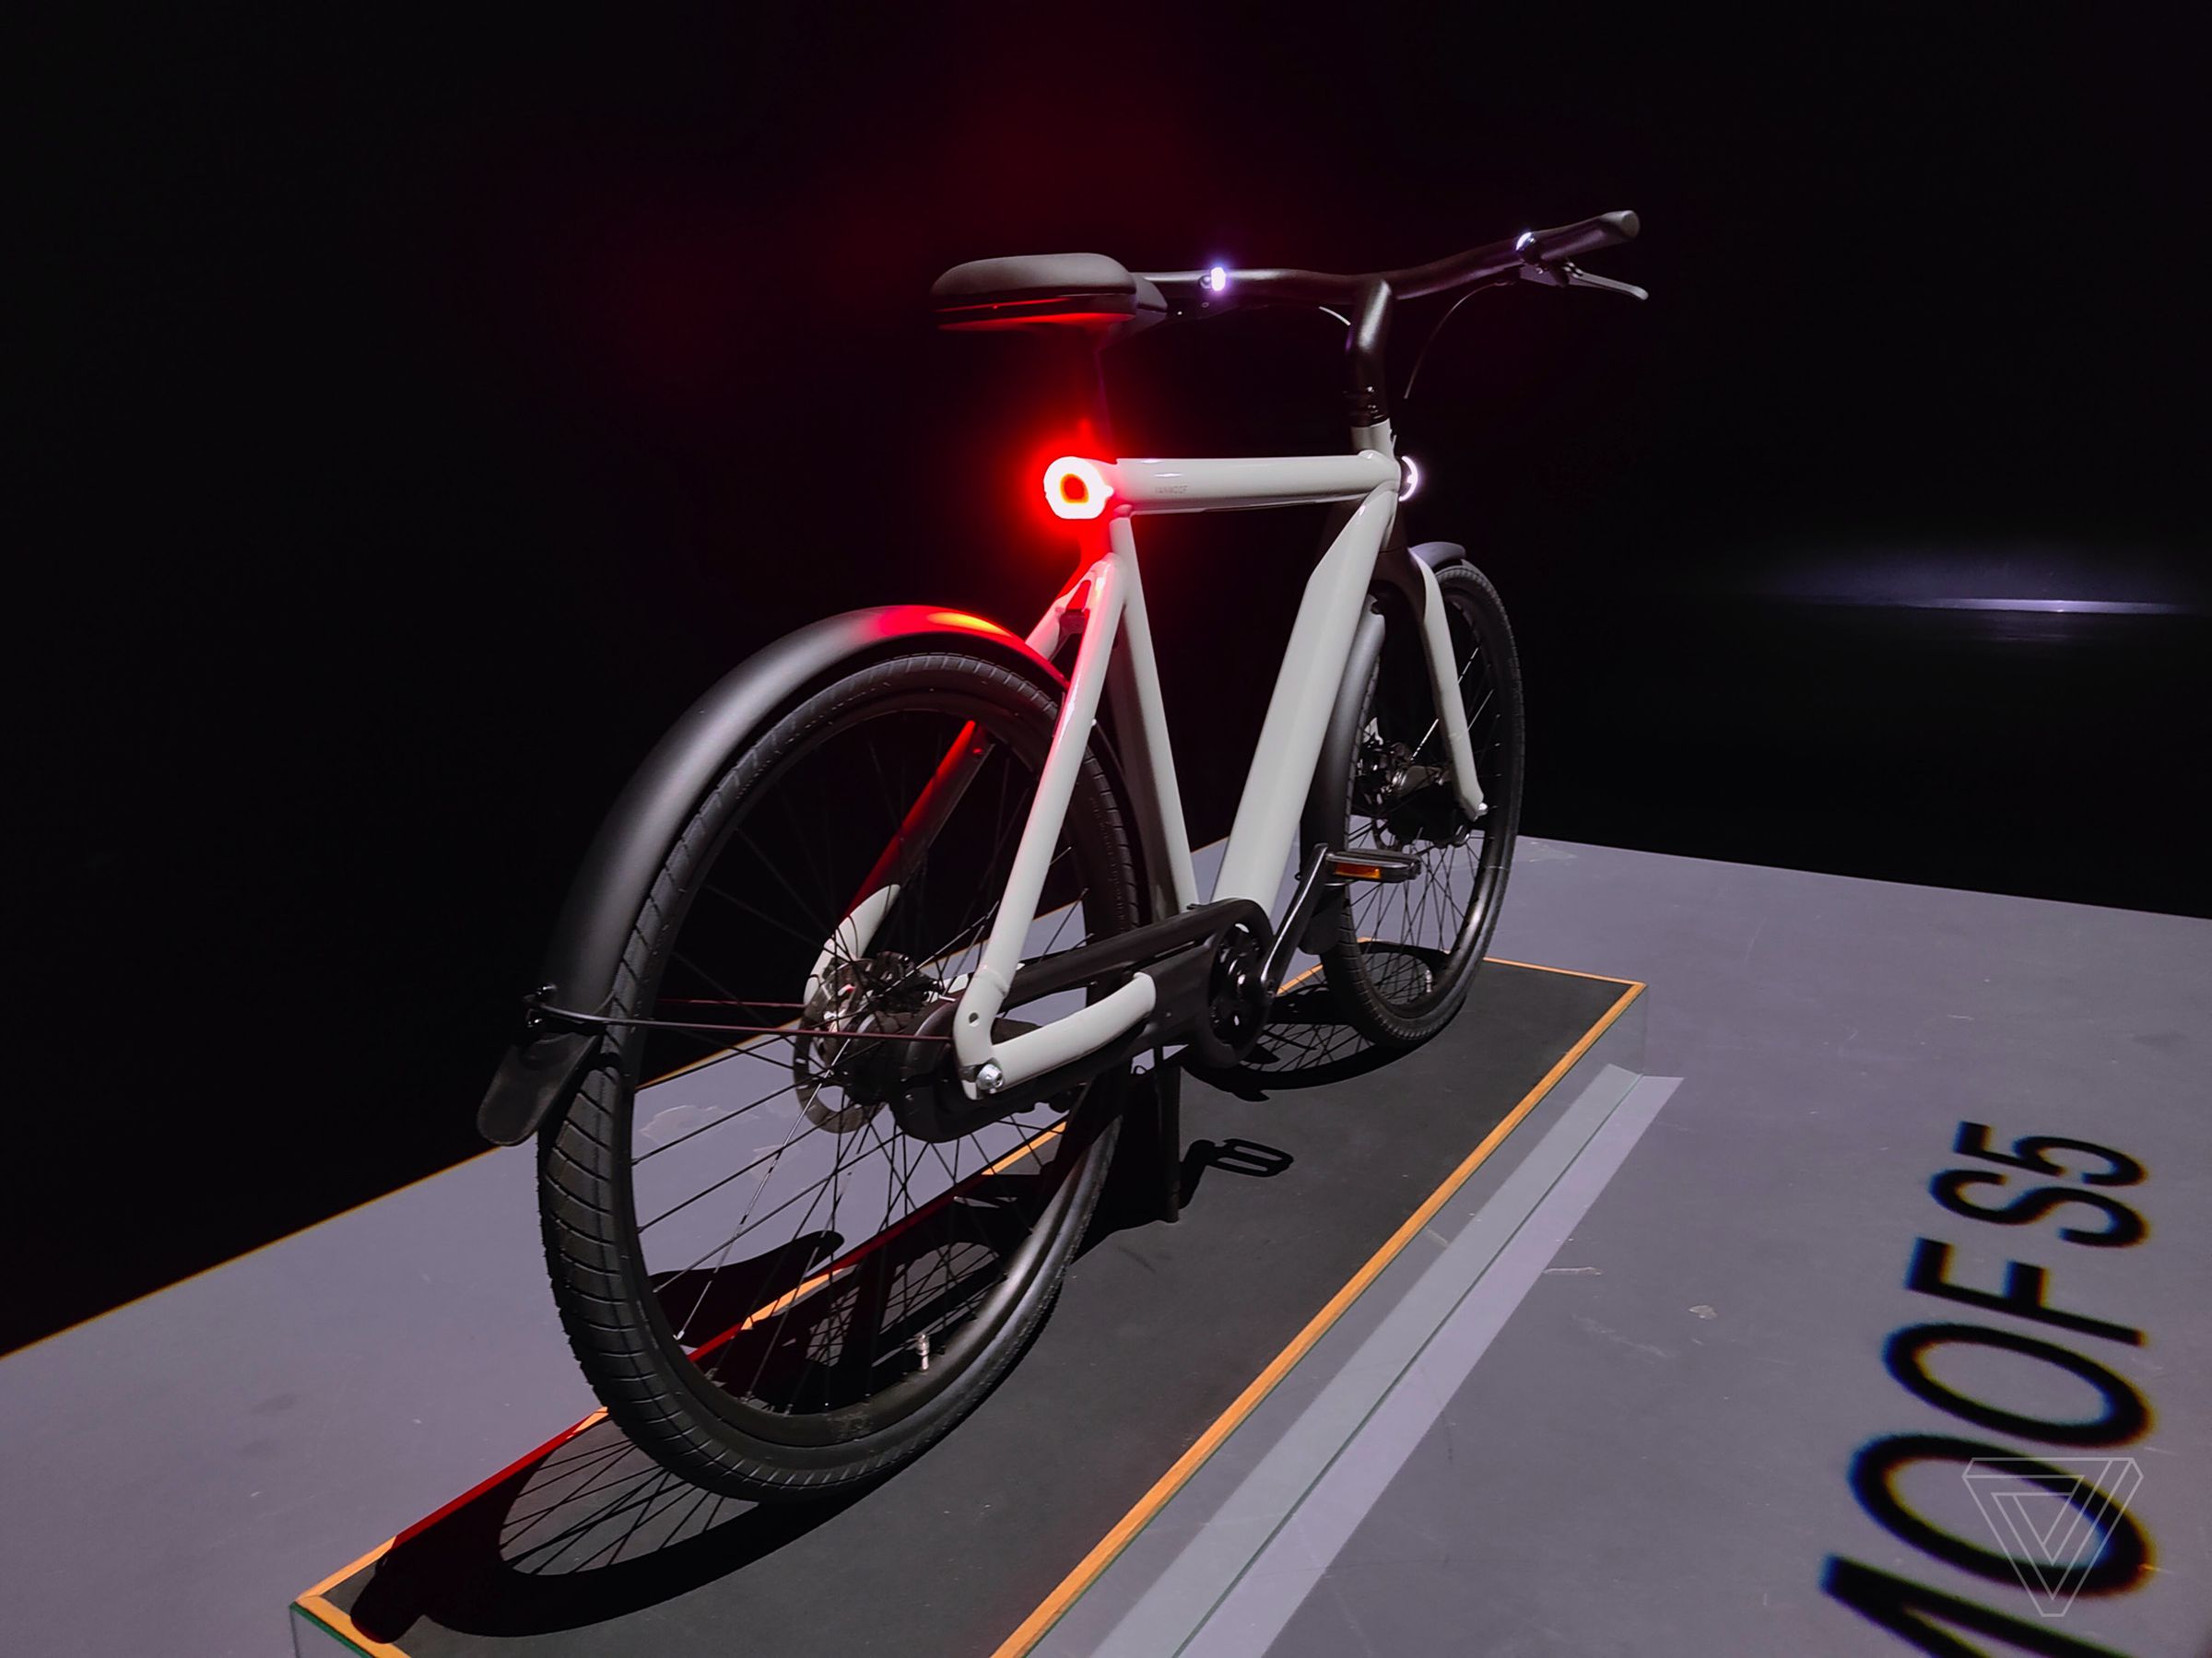 A brighter and slightly redesigned rear light and new Halo Rings make the bike more visible.